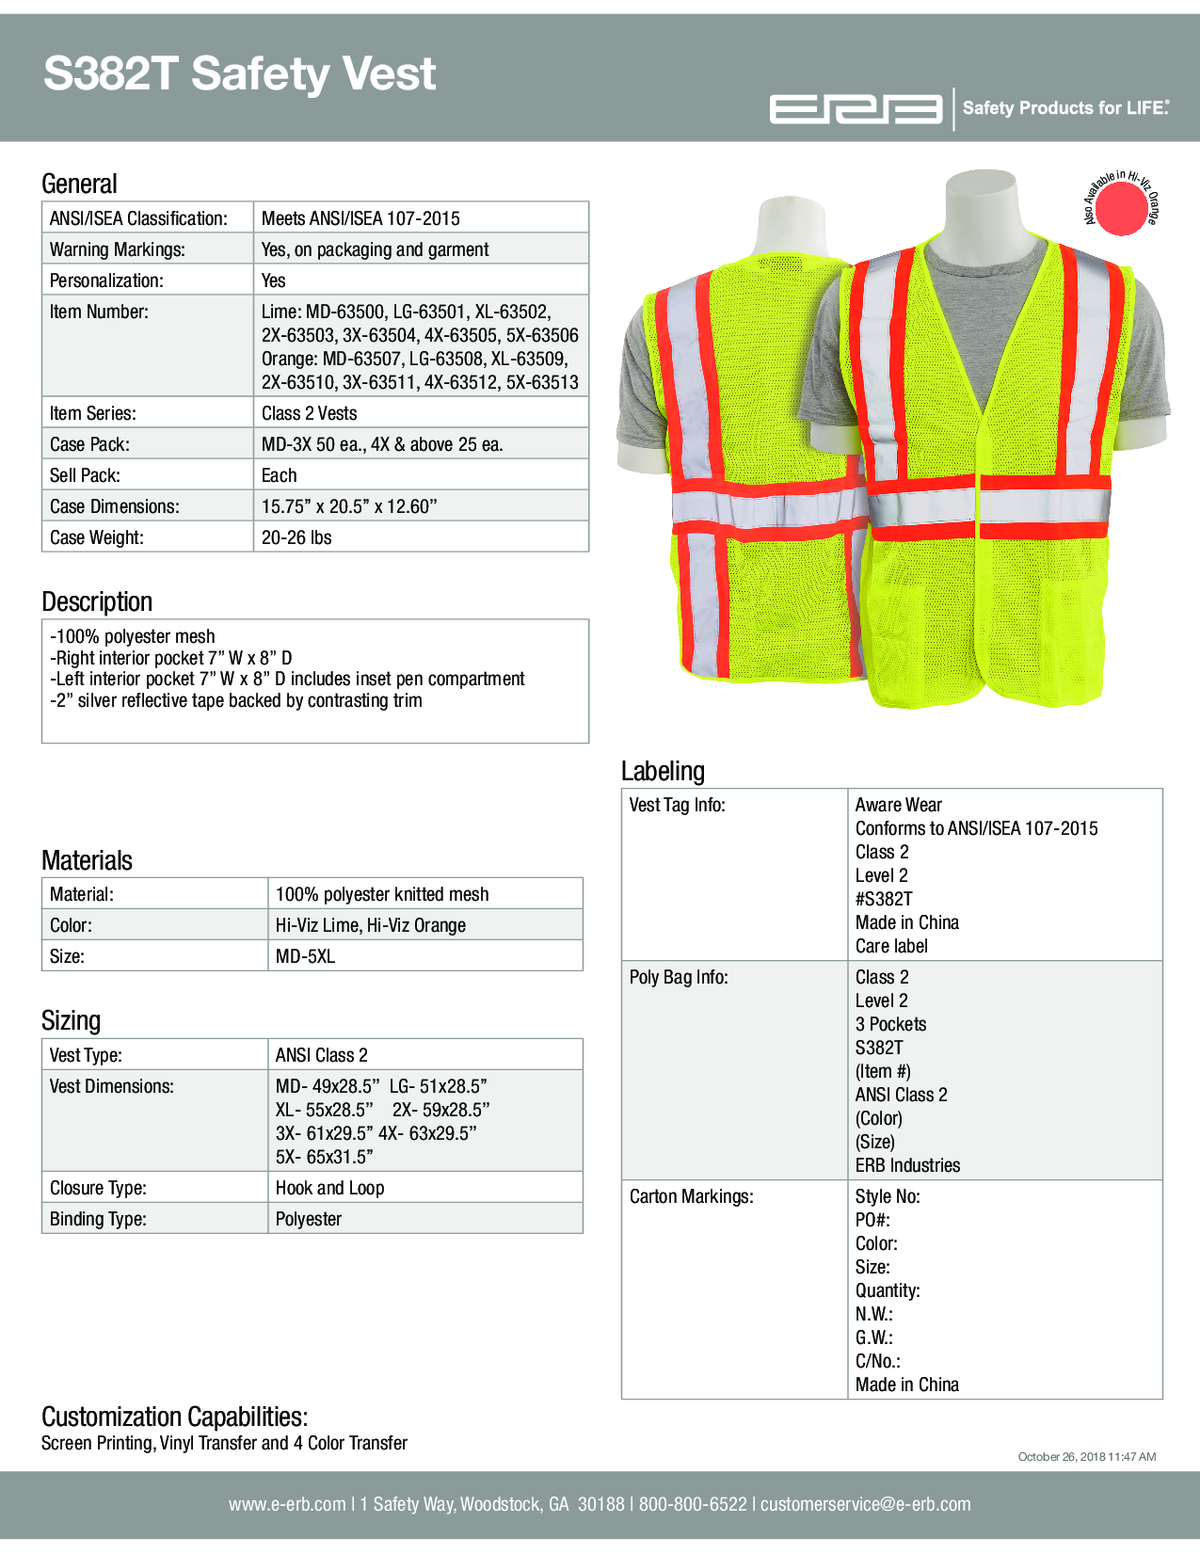 S382T Class 2 Mesh Safety Vest with Contrasting Tape - Tall